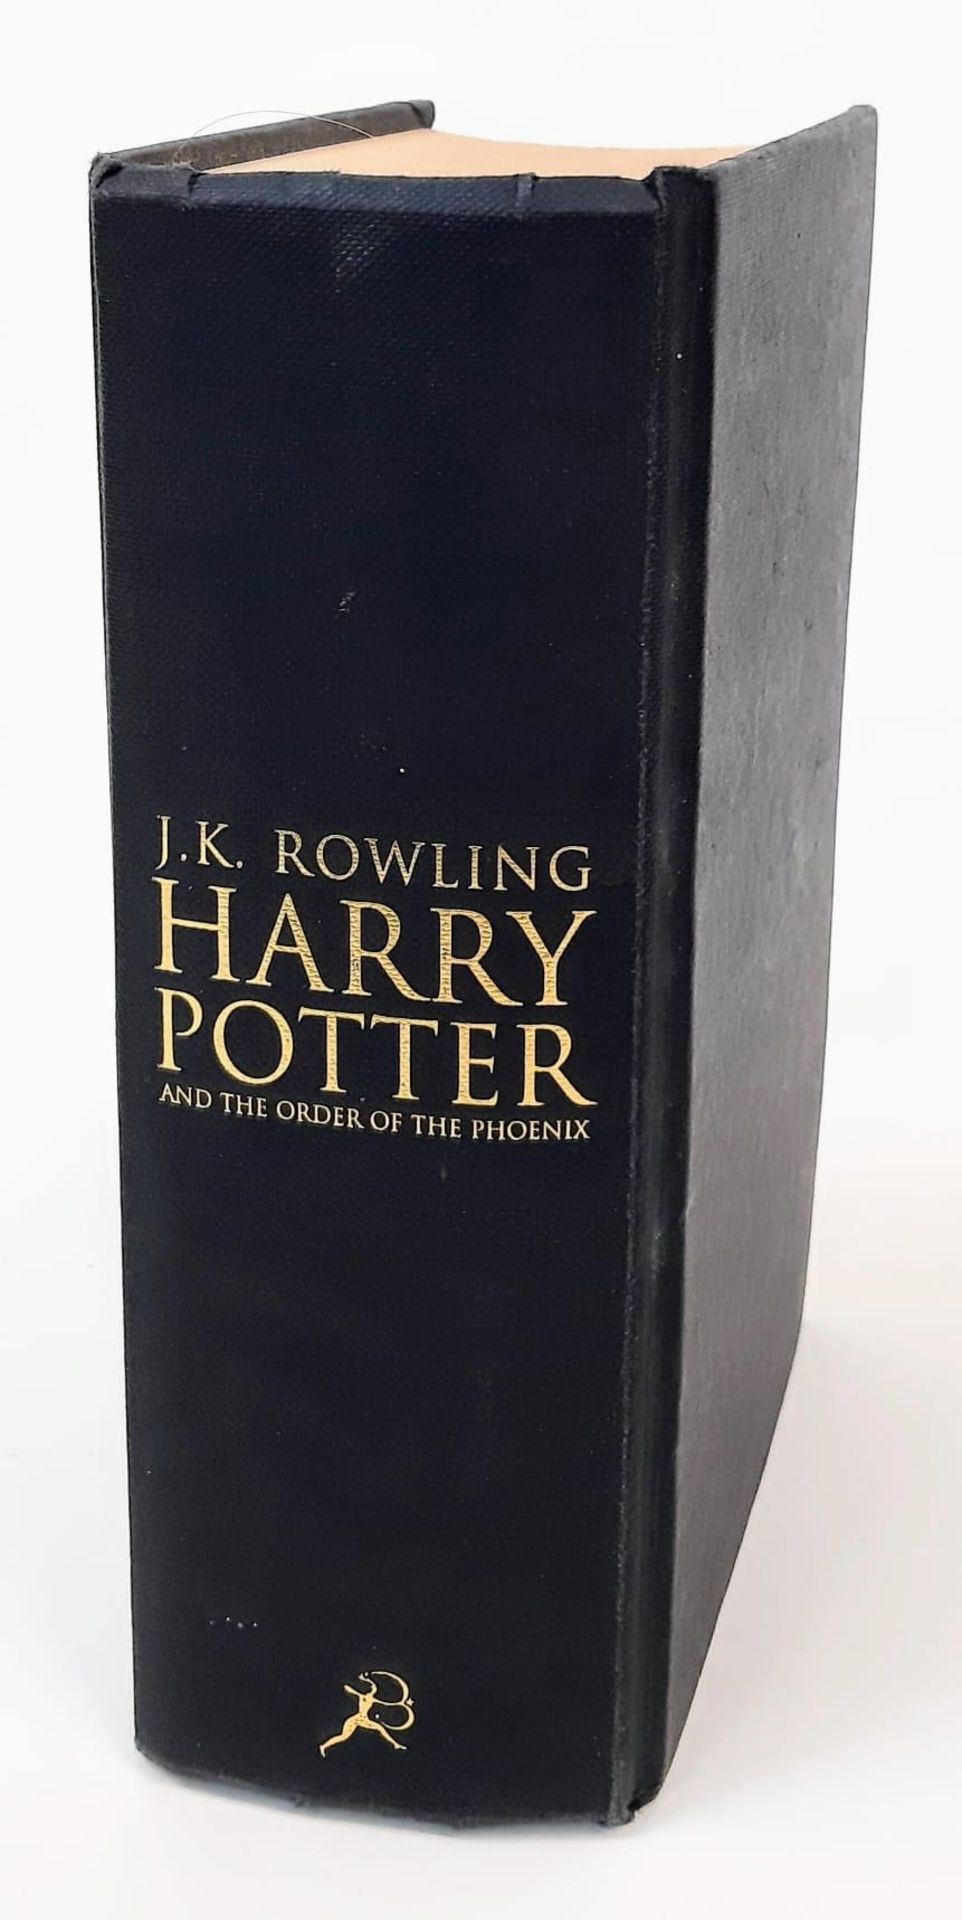 An Early Hardback Edition of Harry Potter And The Order of The Phoenix.